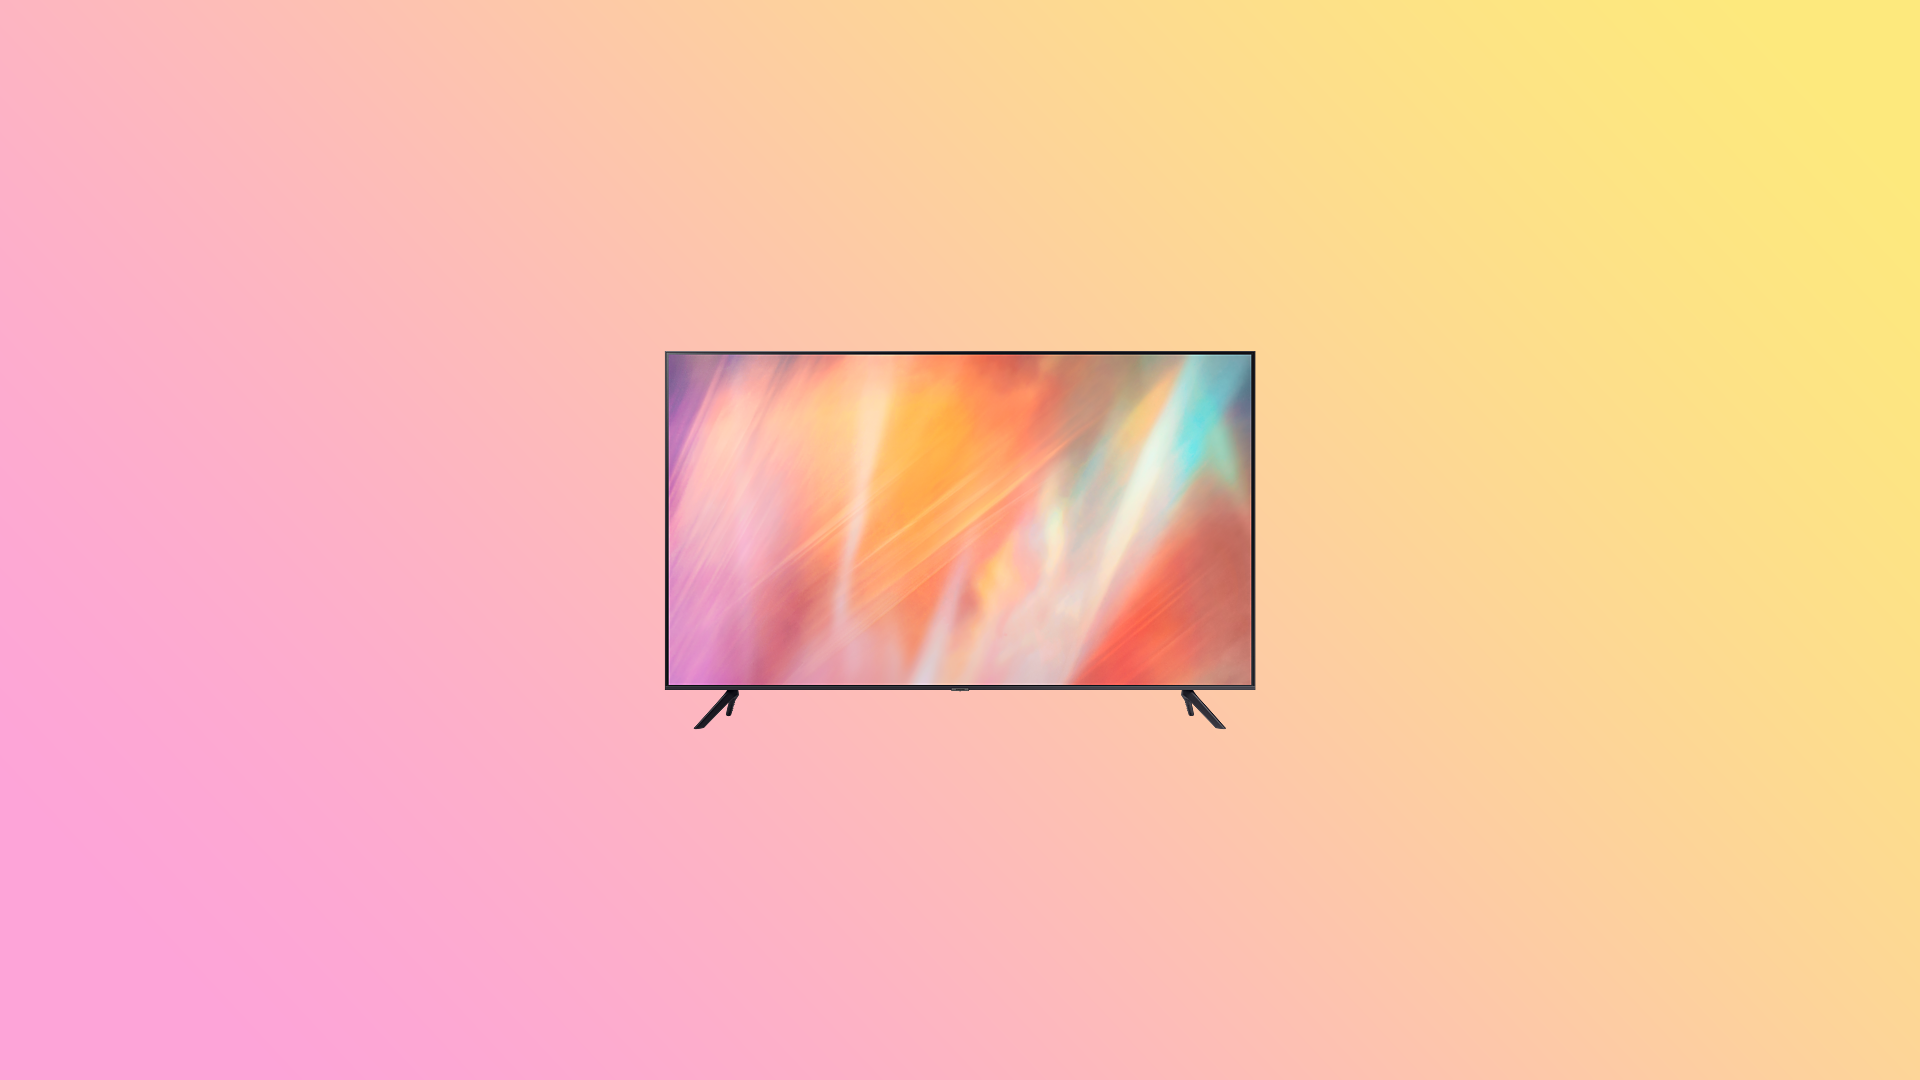 How to fix Samsung LED TV blurry screen